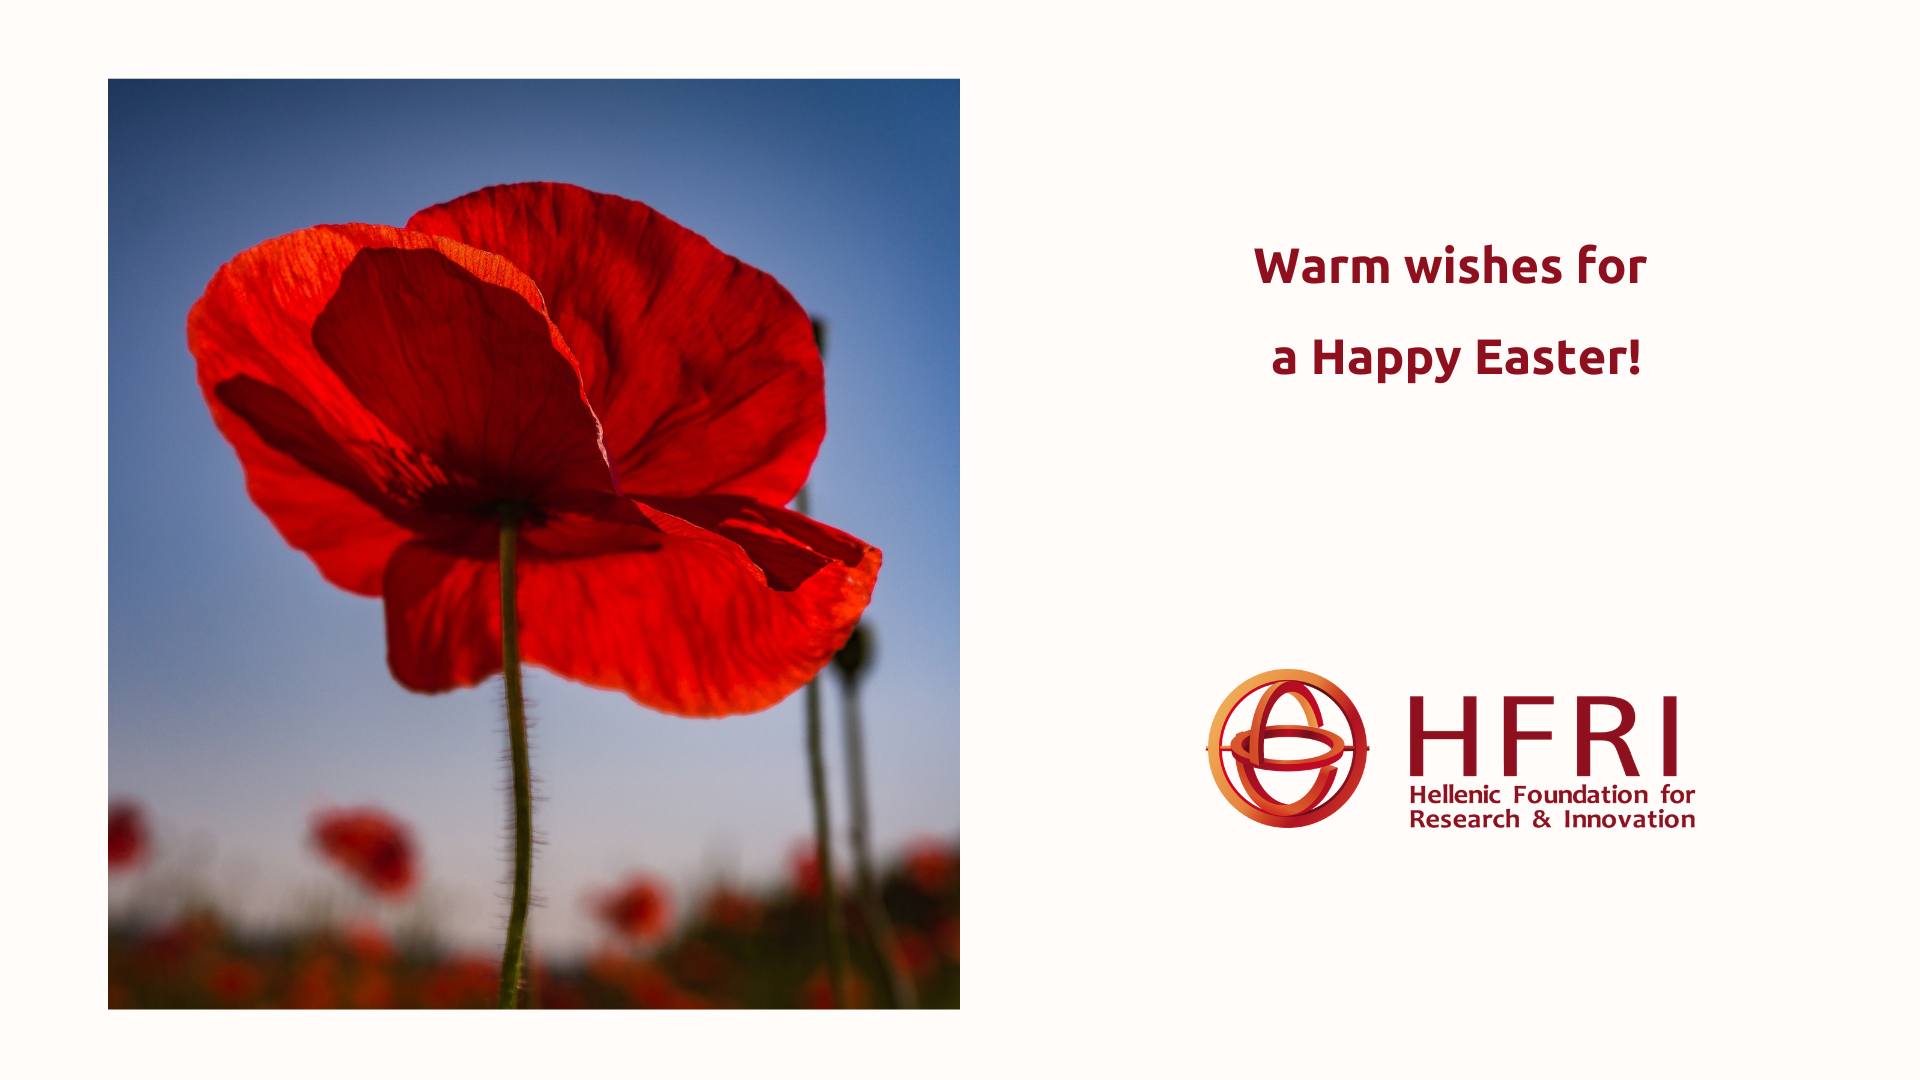 Kind Wishes for a Happy Easter from HFRI